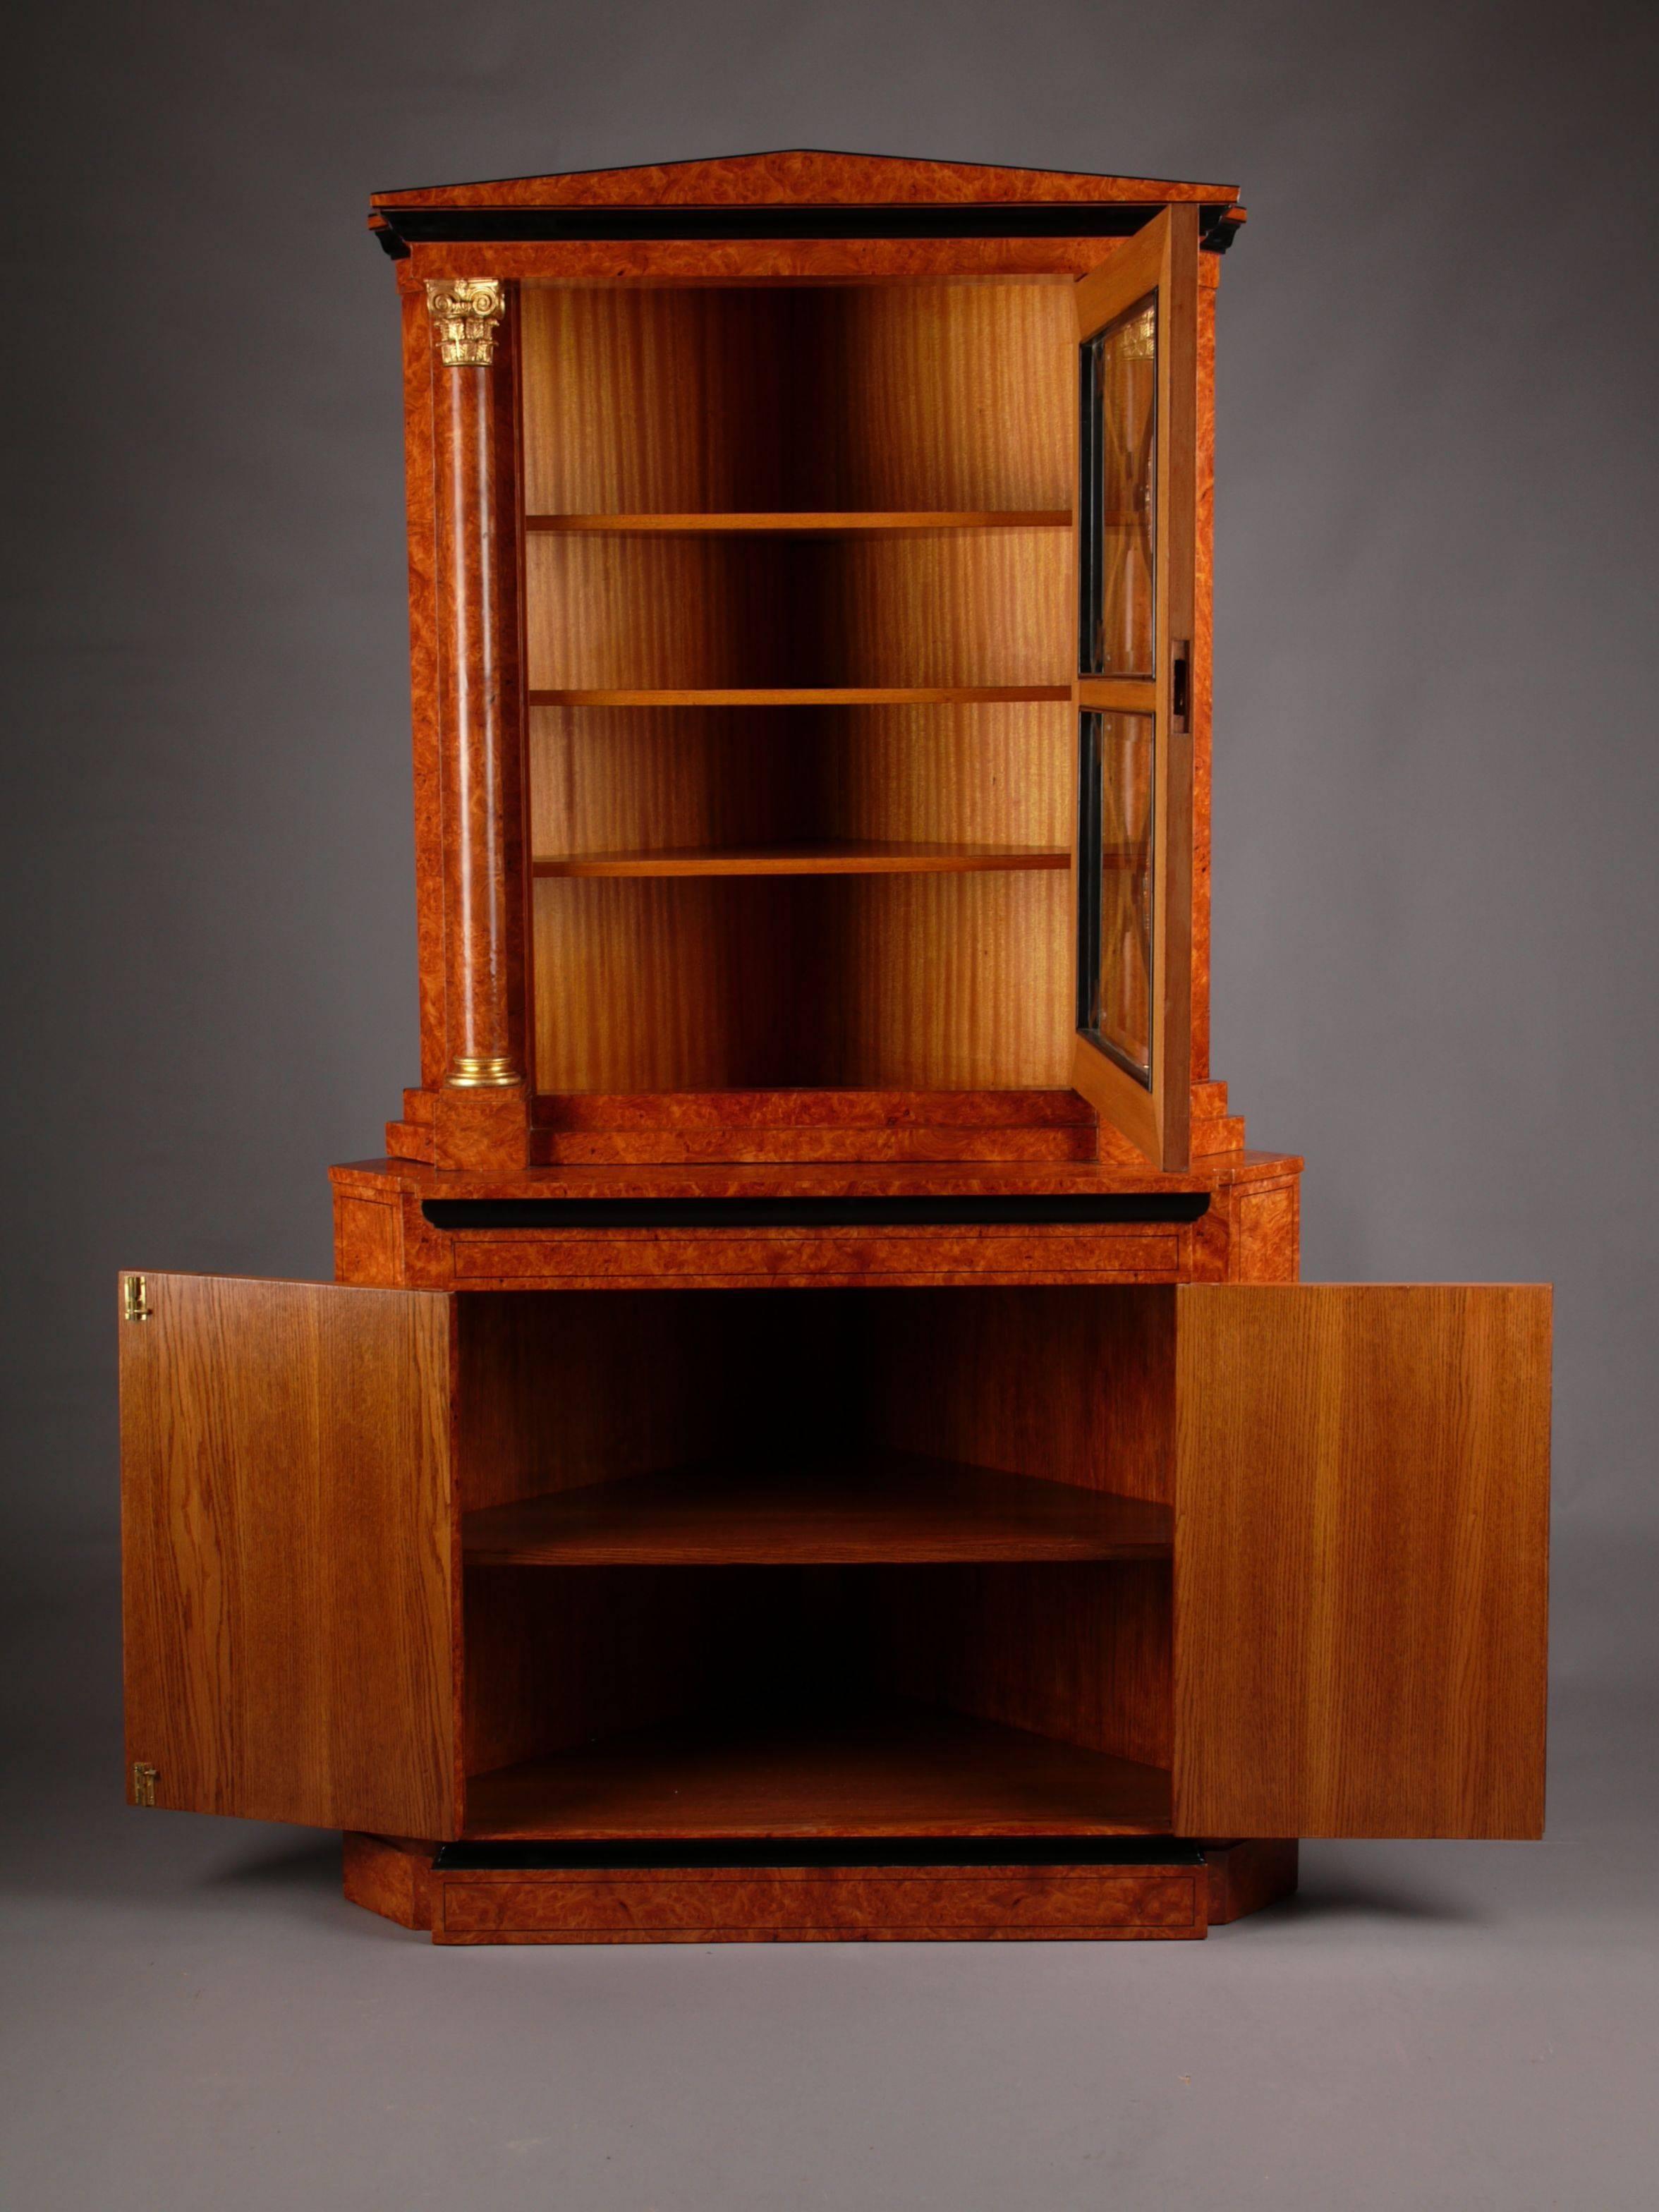 Elegant corner cupboard in Biedermeier style.
Bird’s eye maple root veneer on solid pinewood. Partially ebonized. Two drawered body over prominent overhanging pedestal, internal shelves. Narrow over hanging top platter. Over which a one drawered